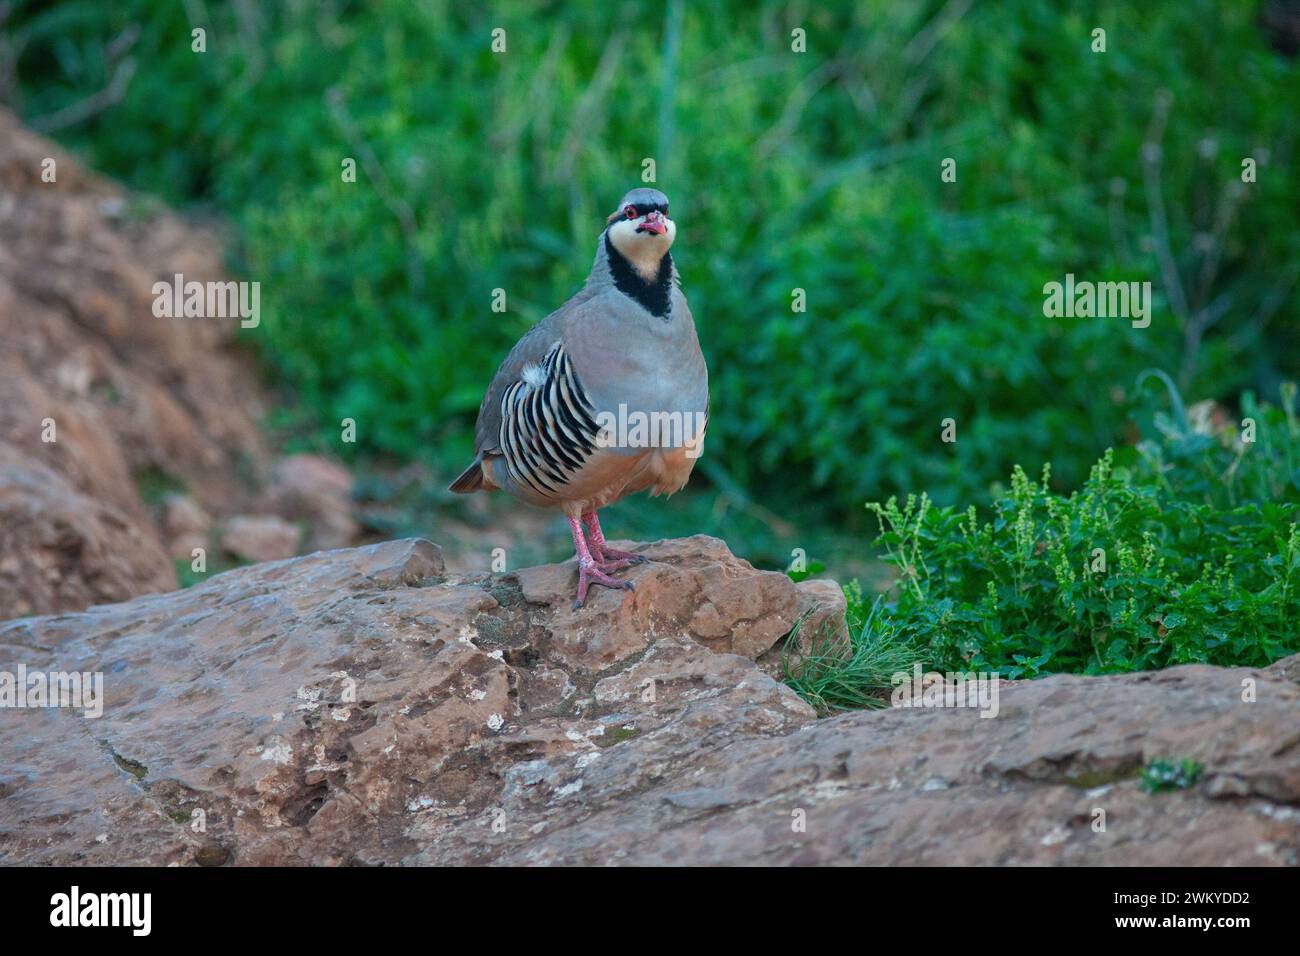 A grouse at cape Sounio, Greece Stock Photo